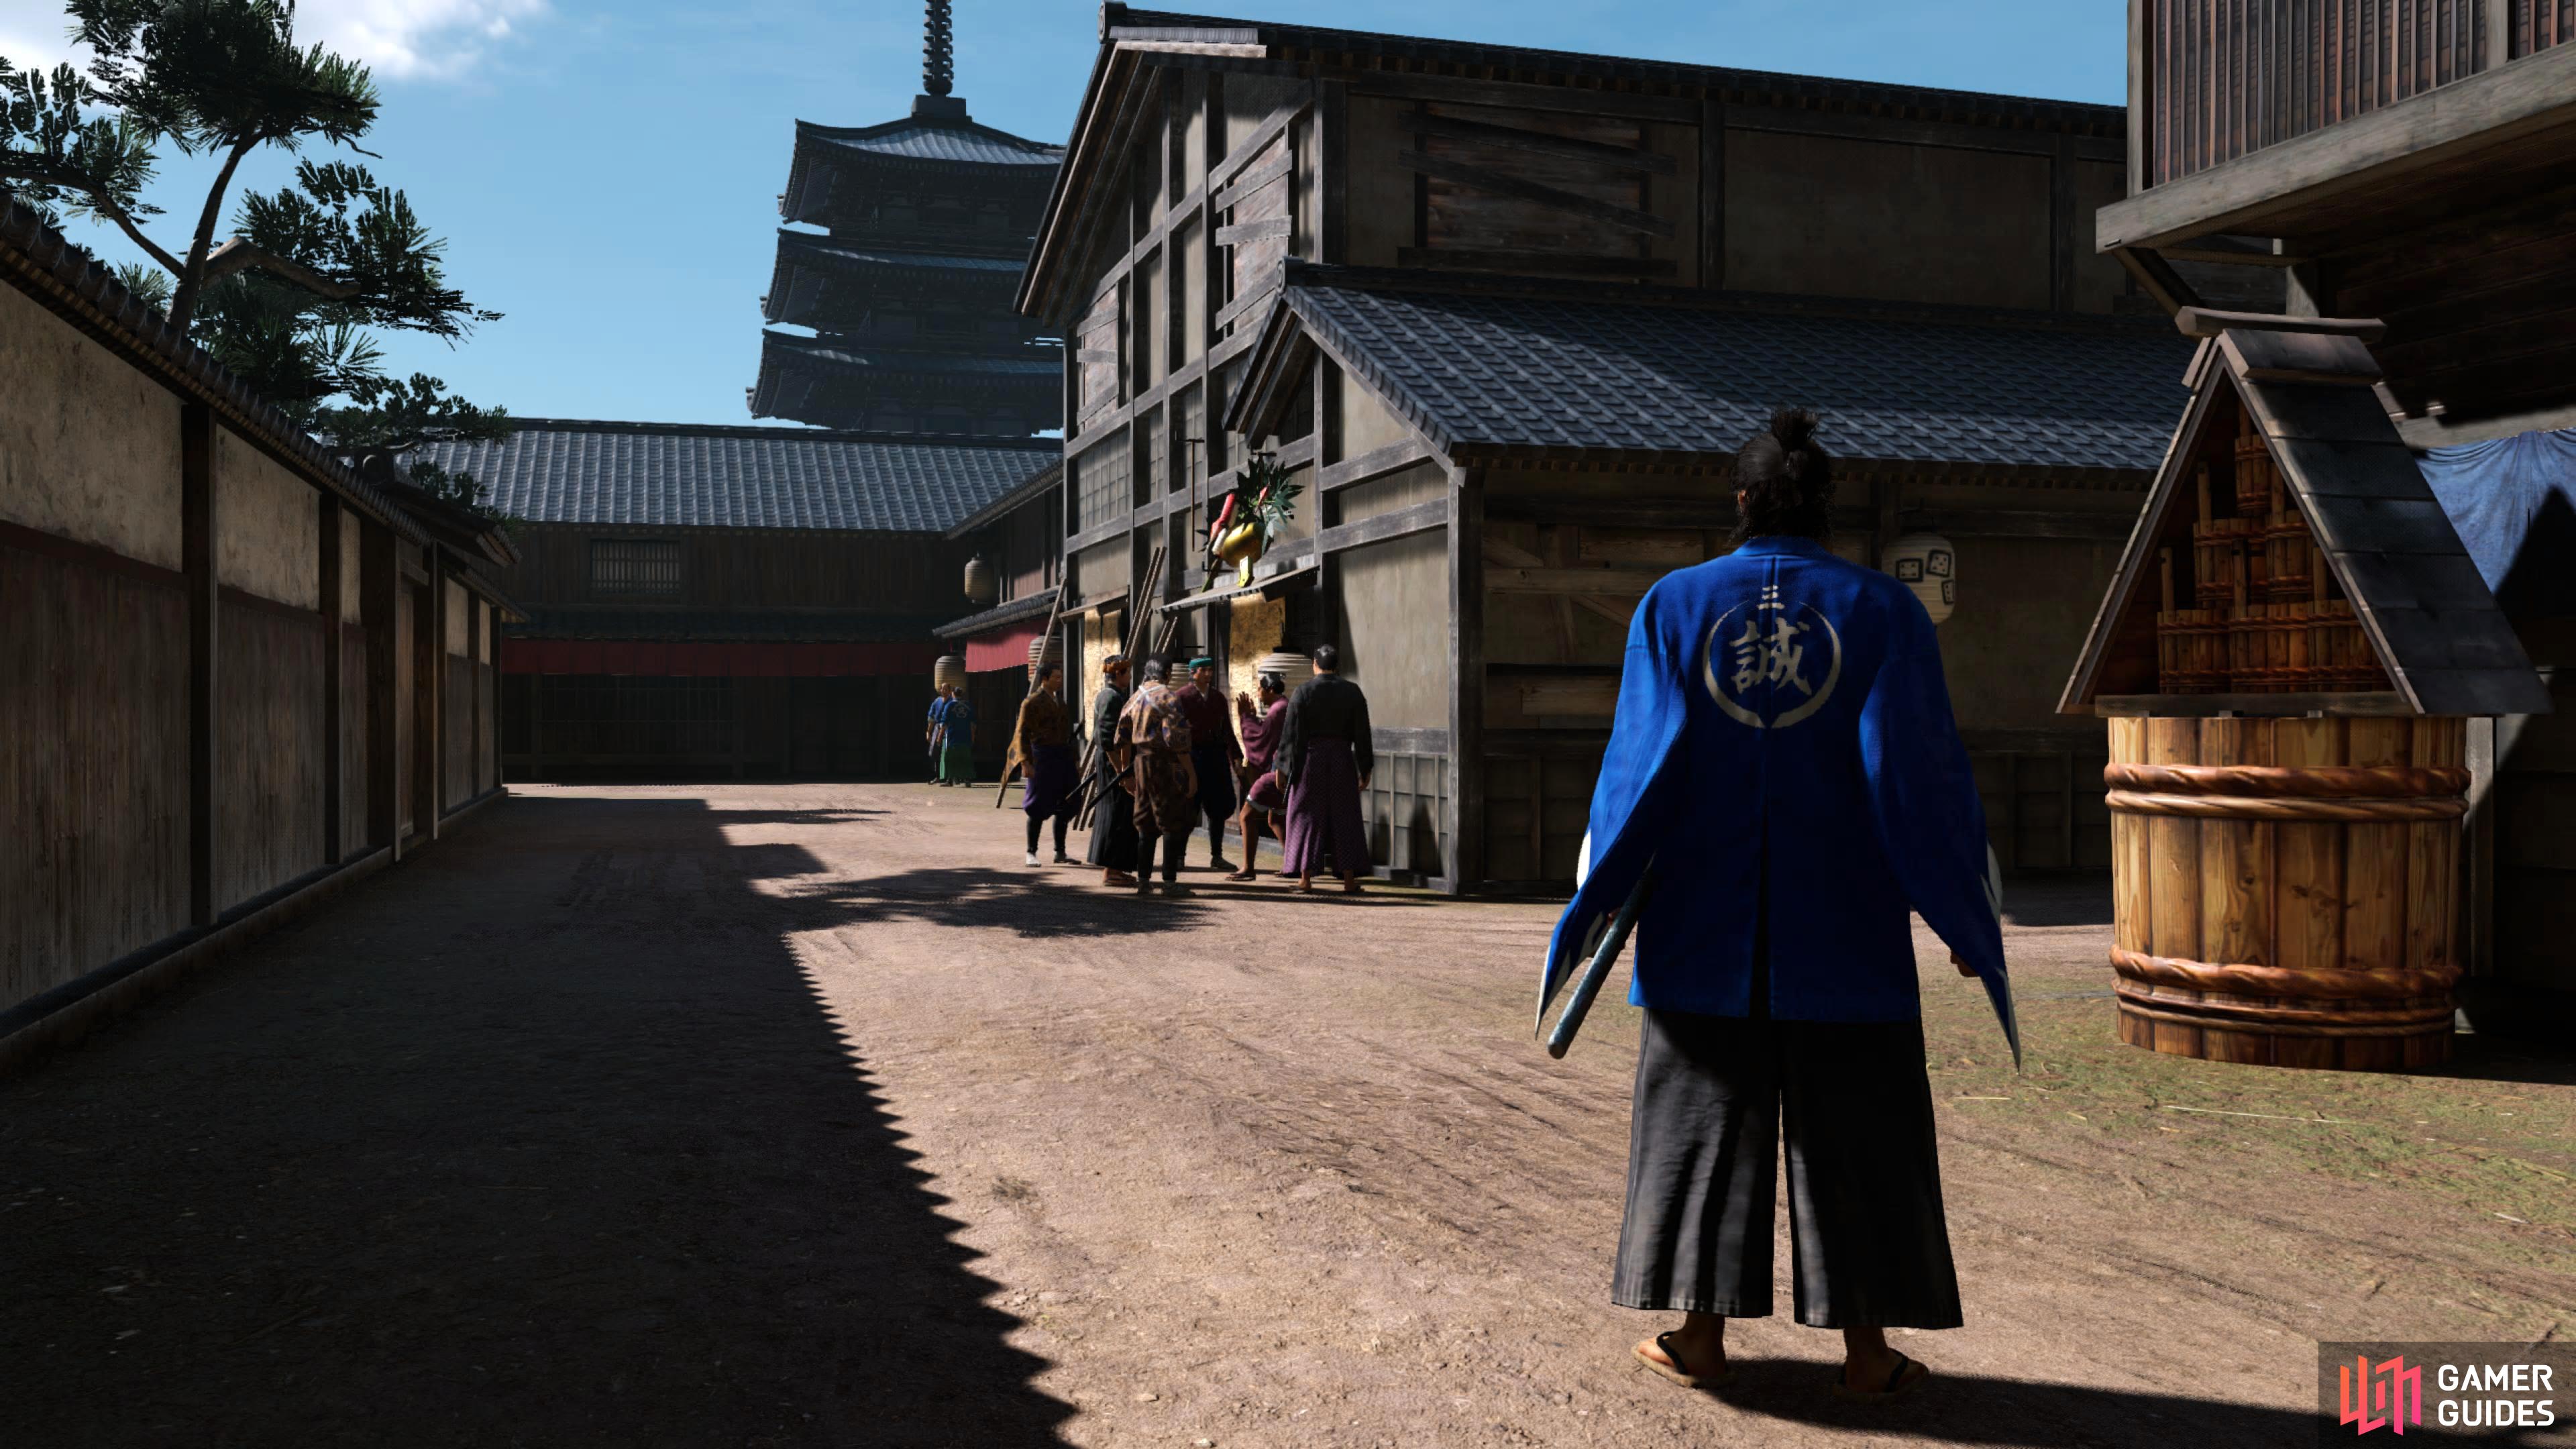 Something’s happening outside the Gambler’s Den in Rakugai, what could be going on?